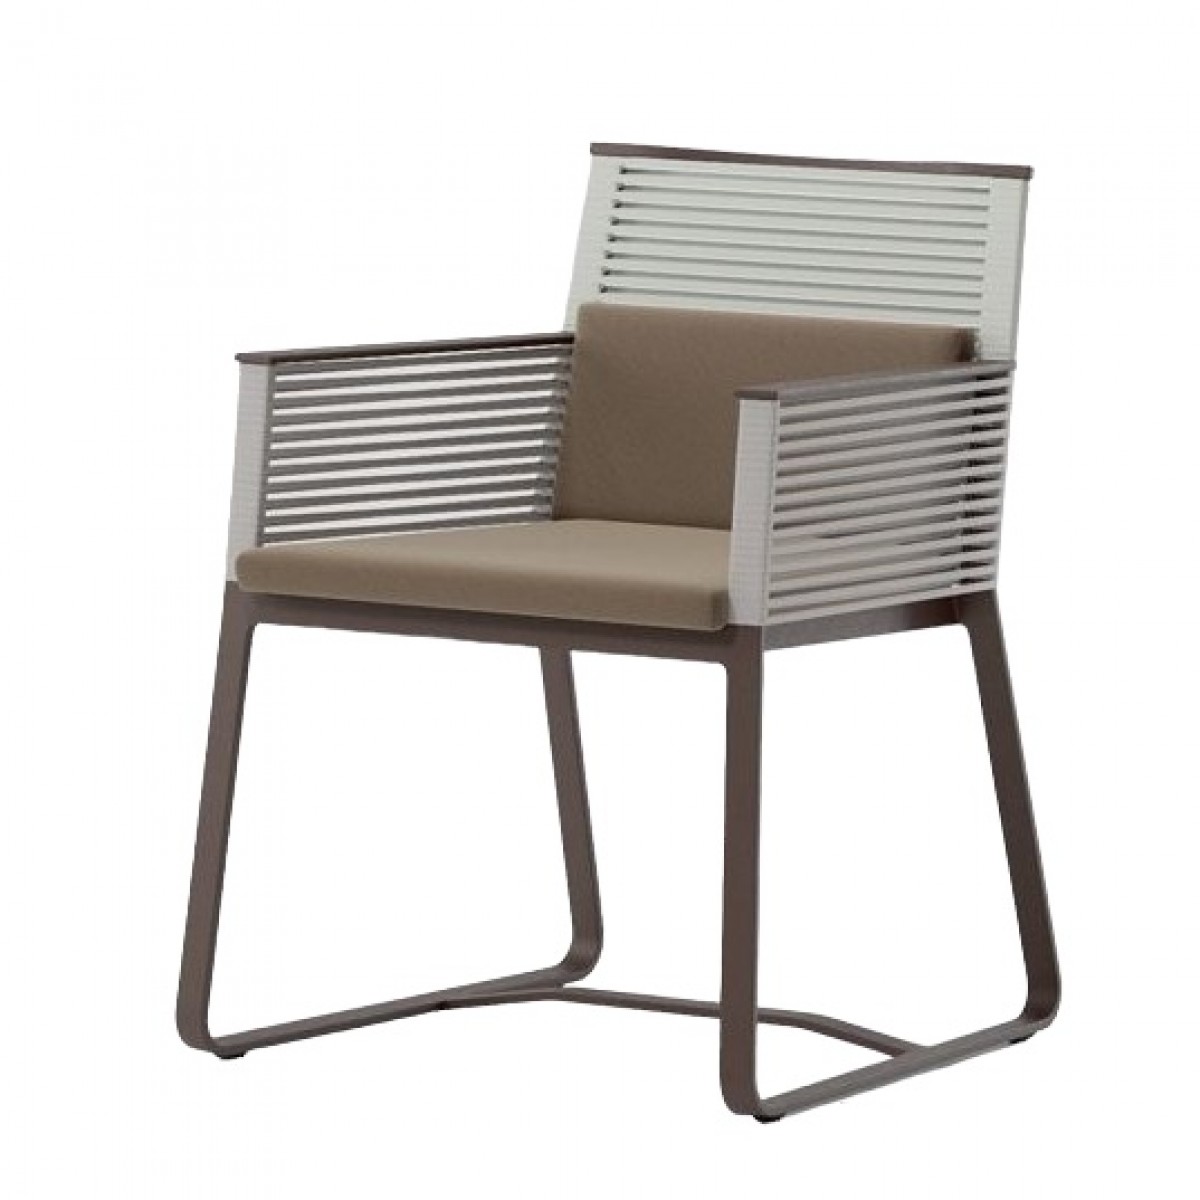 Product Image LANDSCAPE Chair w/ Arms